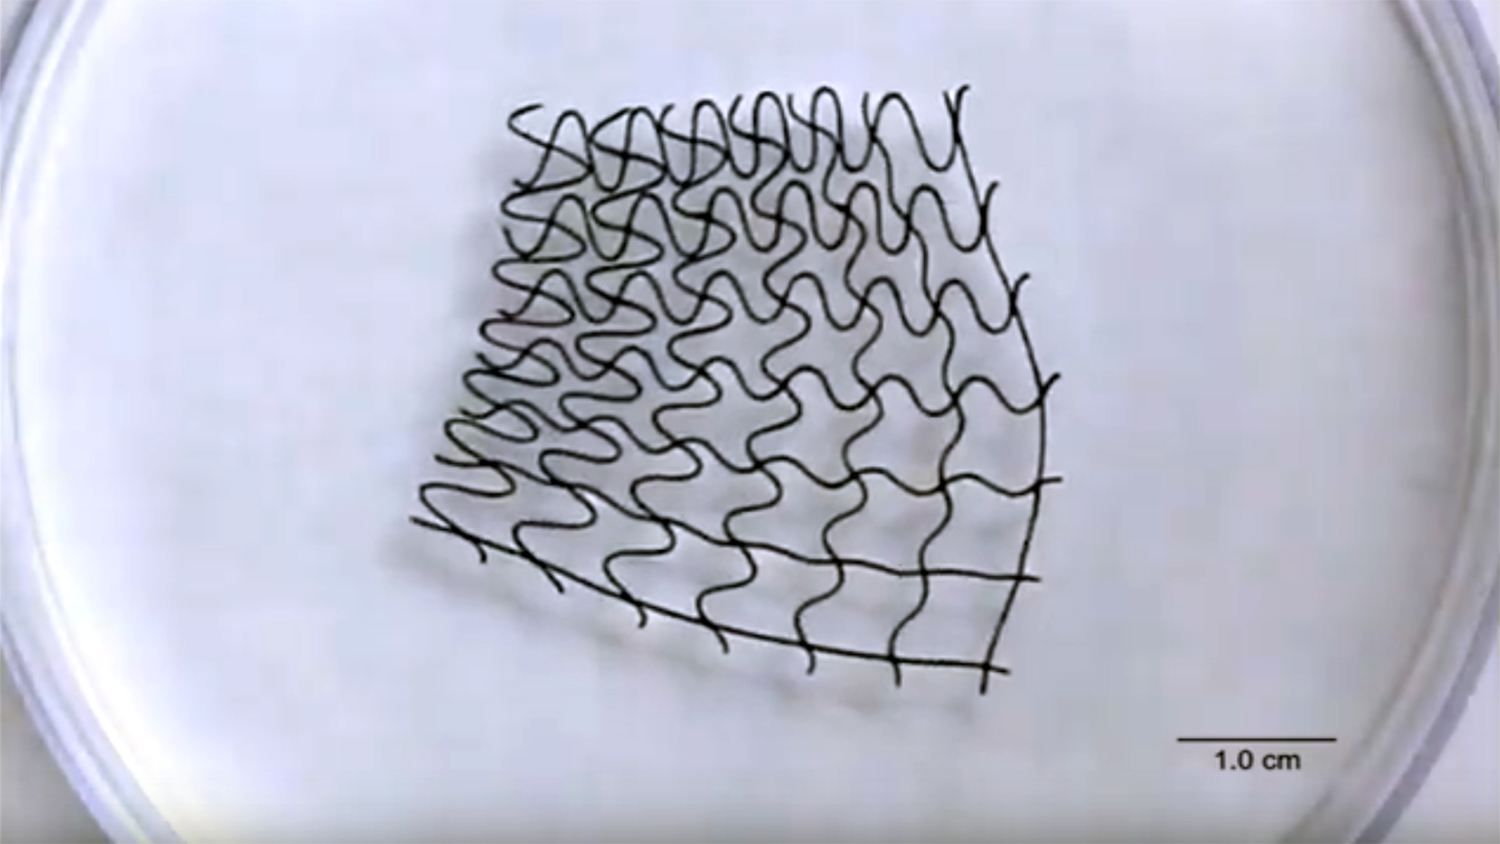 A still image from a video showing a 3-D printed magnetic mesh.